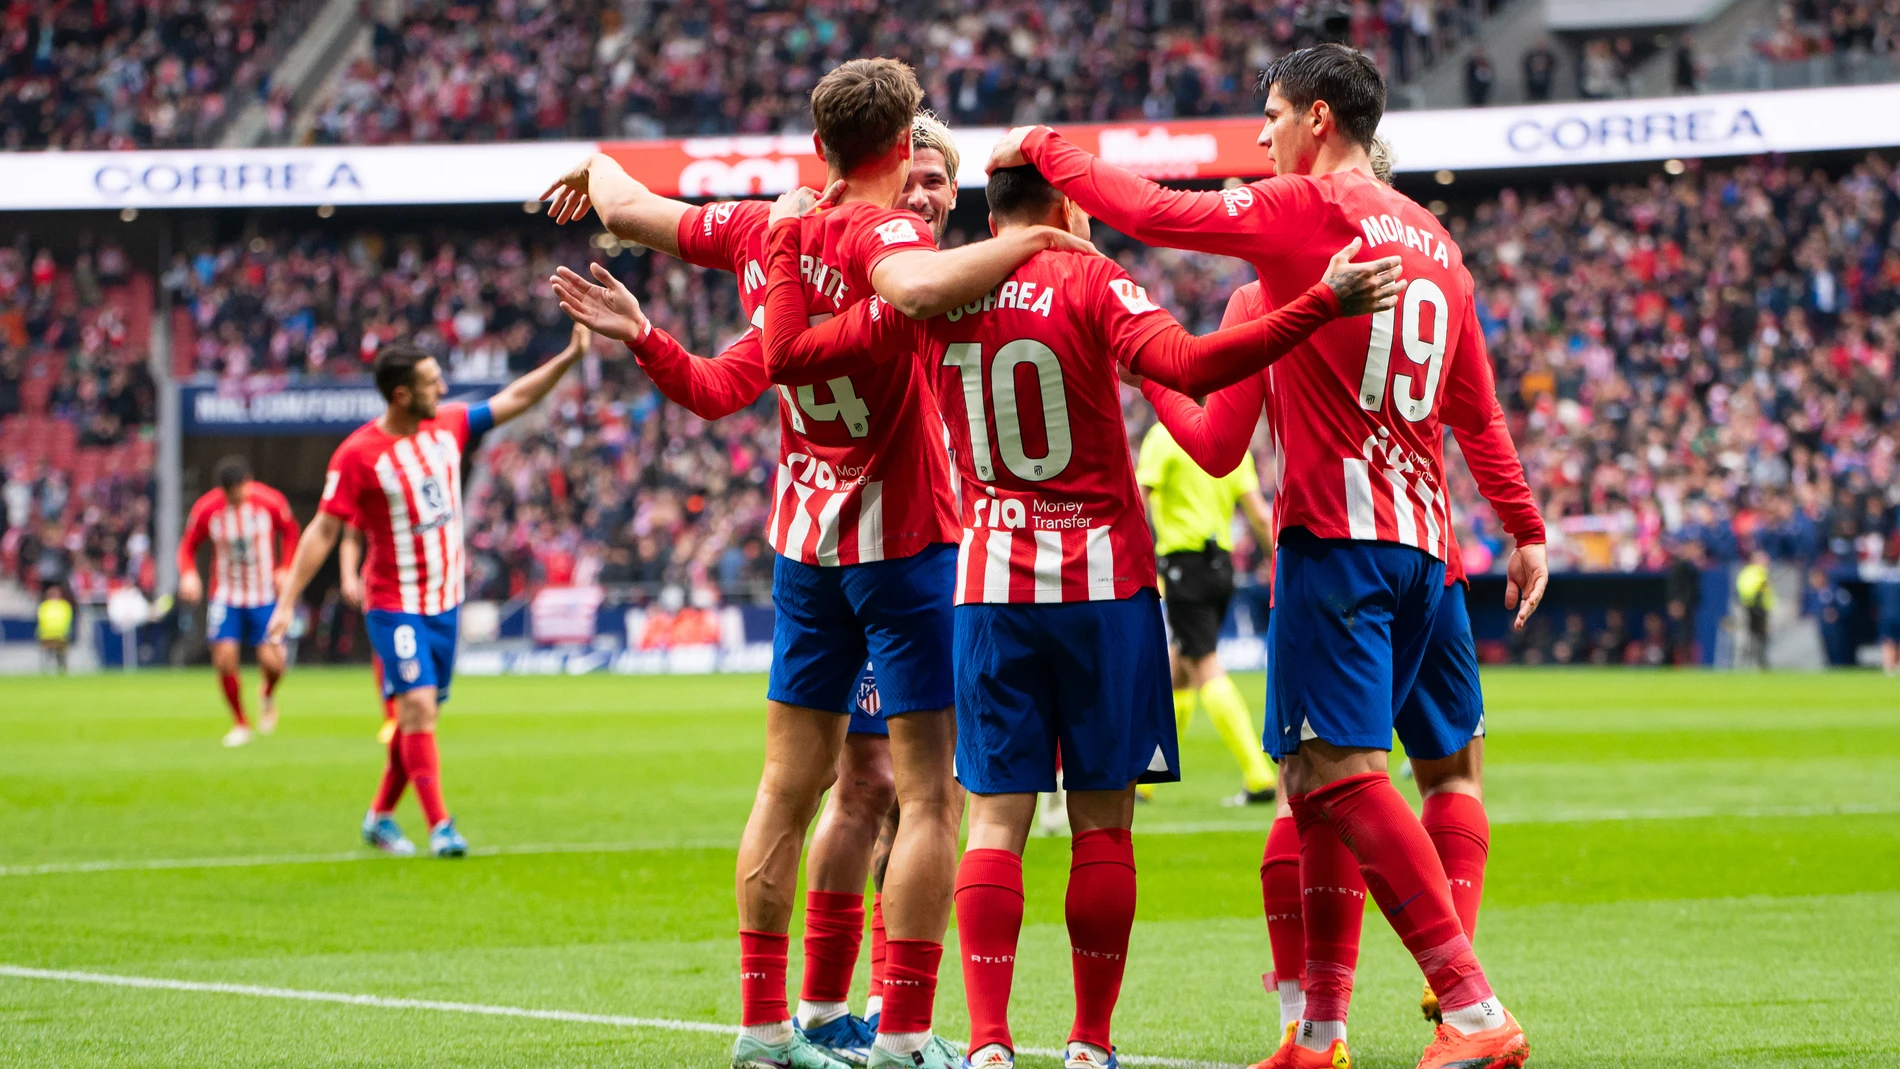 10 December 2023, Spain, Madrid: Atletico Madrid players celebrate their side's goal during the Spanish La Liga soccer match between Atletico Madrid and Almeria at Metropolitano stadium. Photo: Alberto Gardin/ZUMA Press Wire/dpaAlberto Gardin/ZUMA Press Wire/d / DPA10/12/2023 ONLY FOR USE IN SPAIN